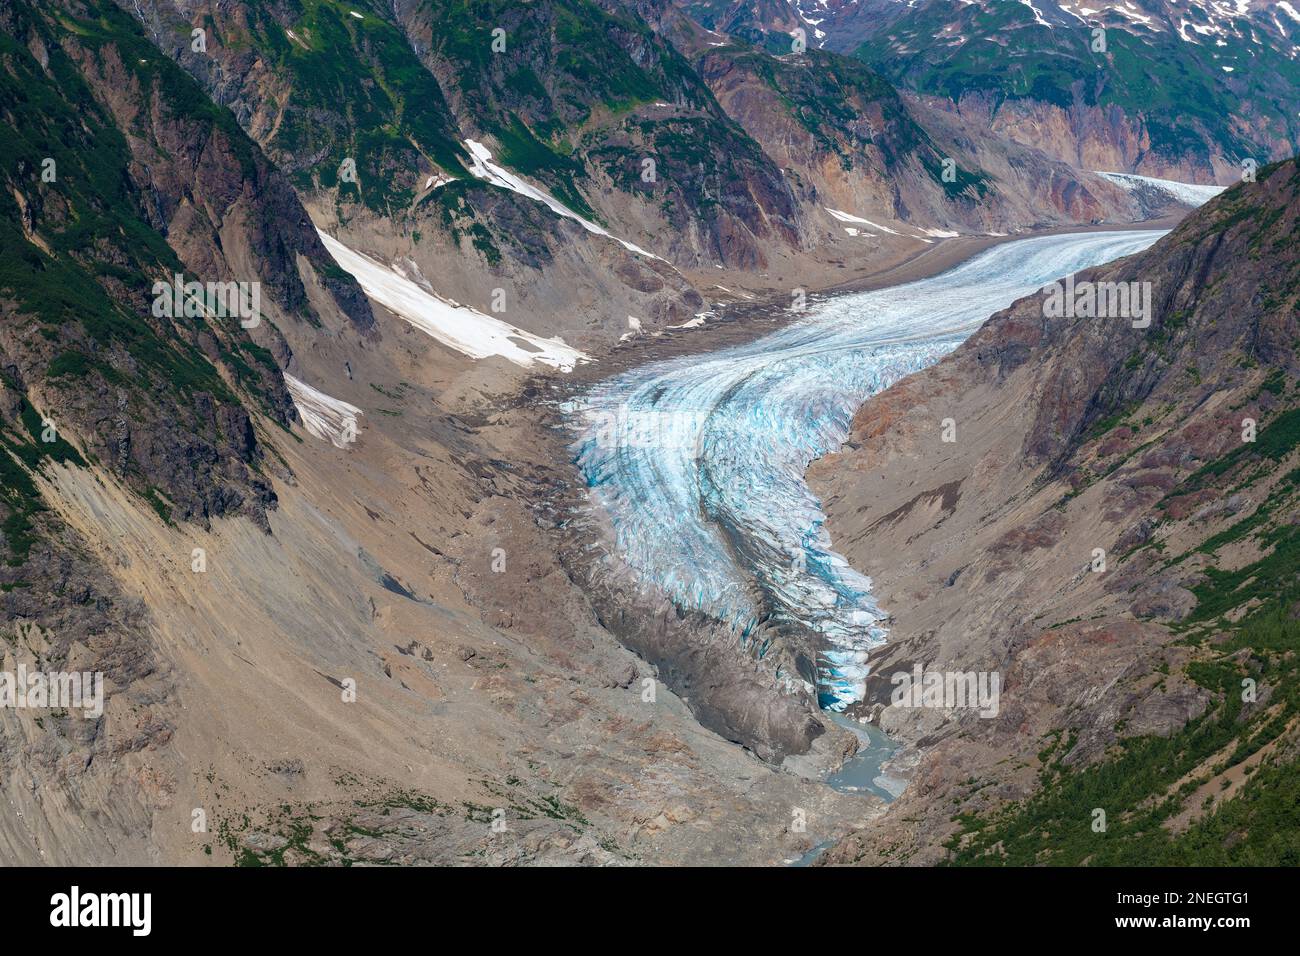 Glacier tongue in a eroded valley from the Salmon Glacier, British Columbia, Canada. Stock Photo